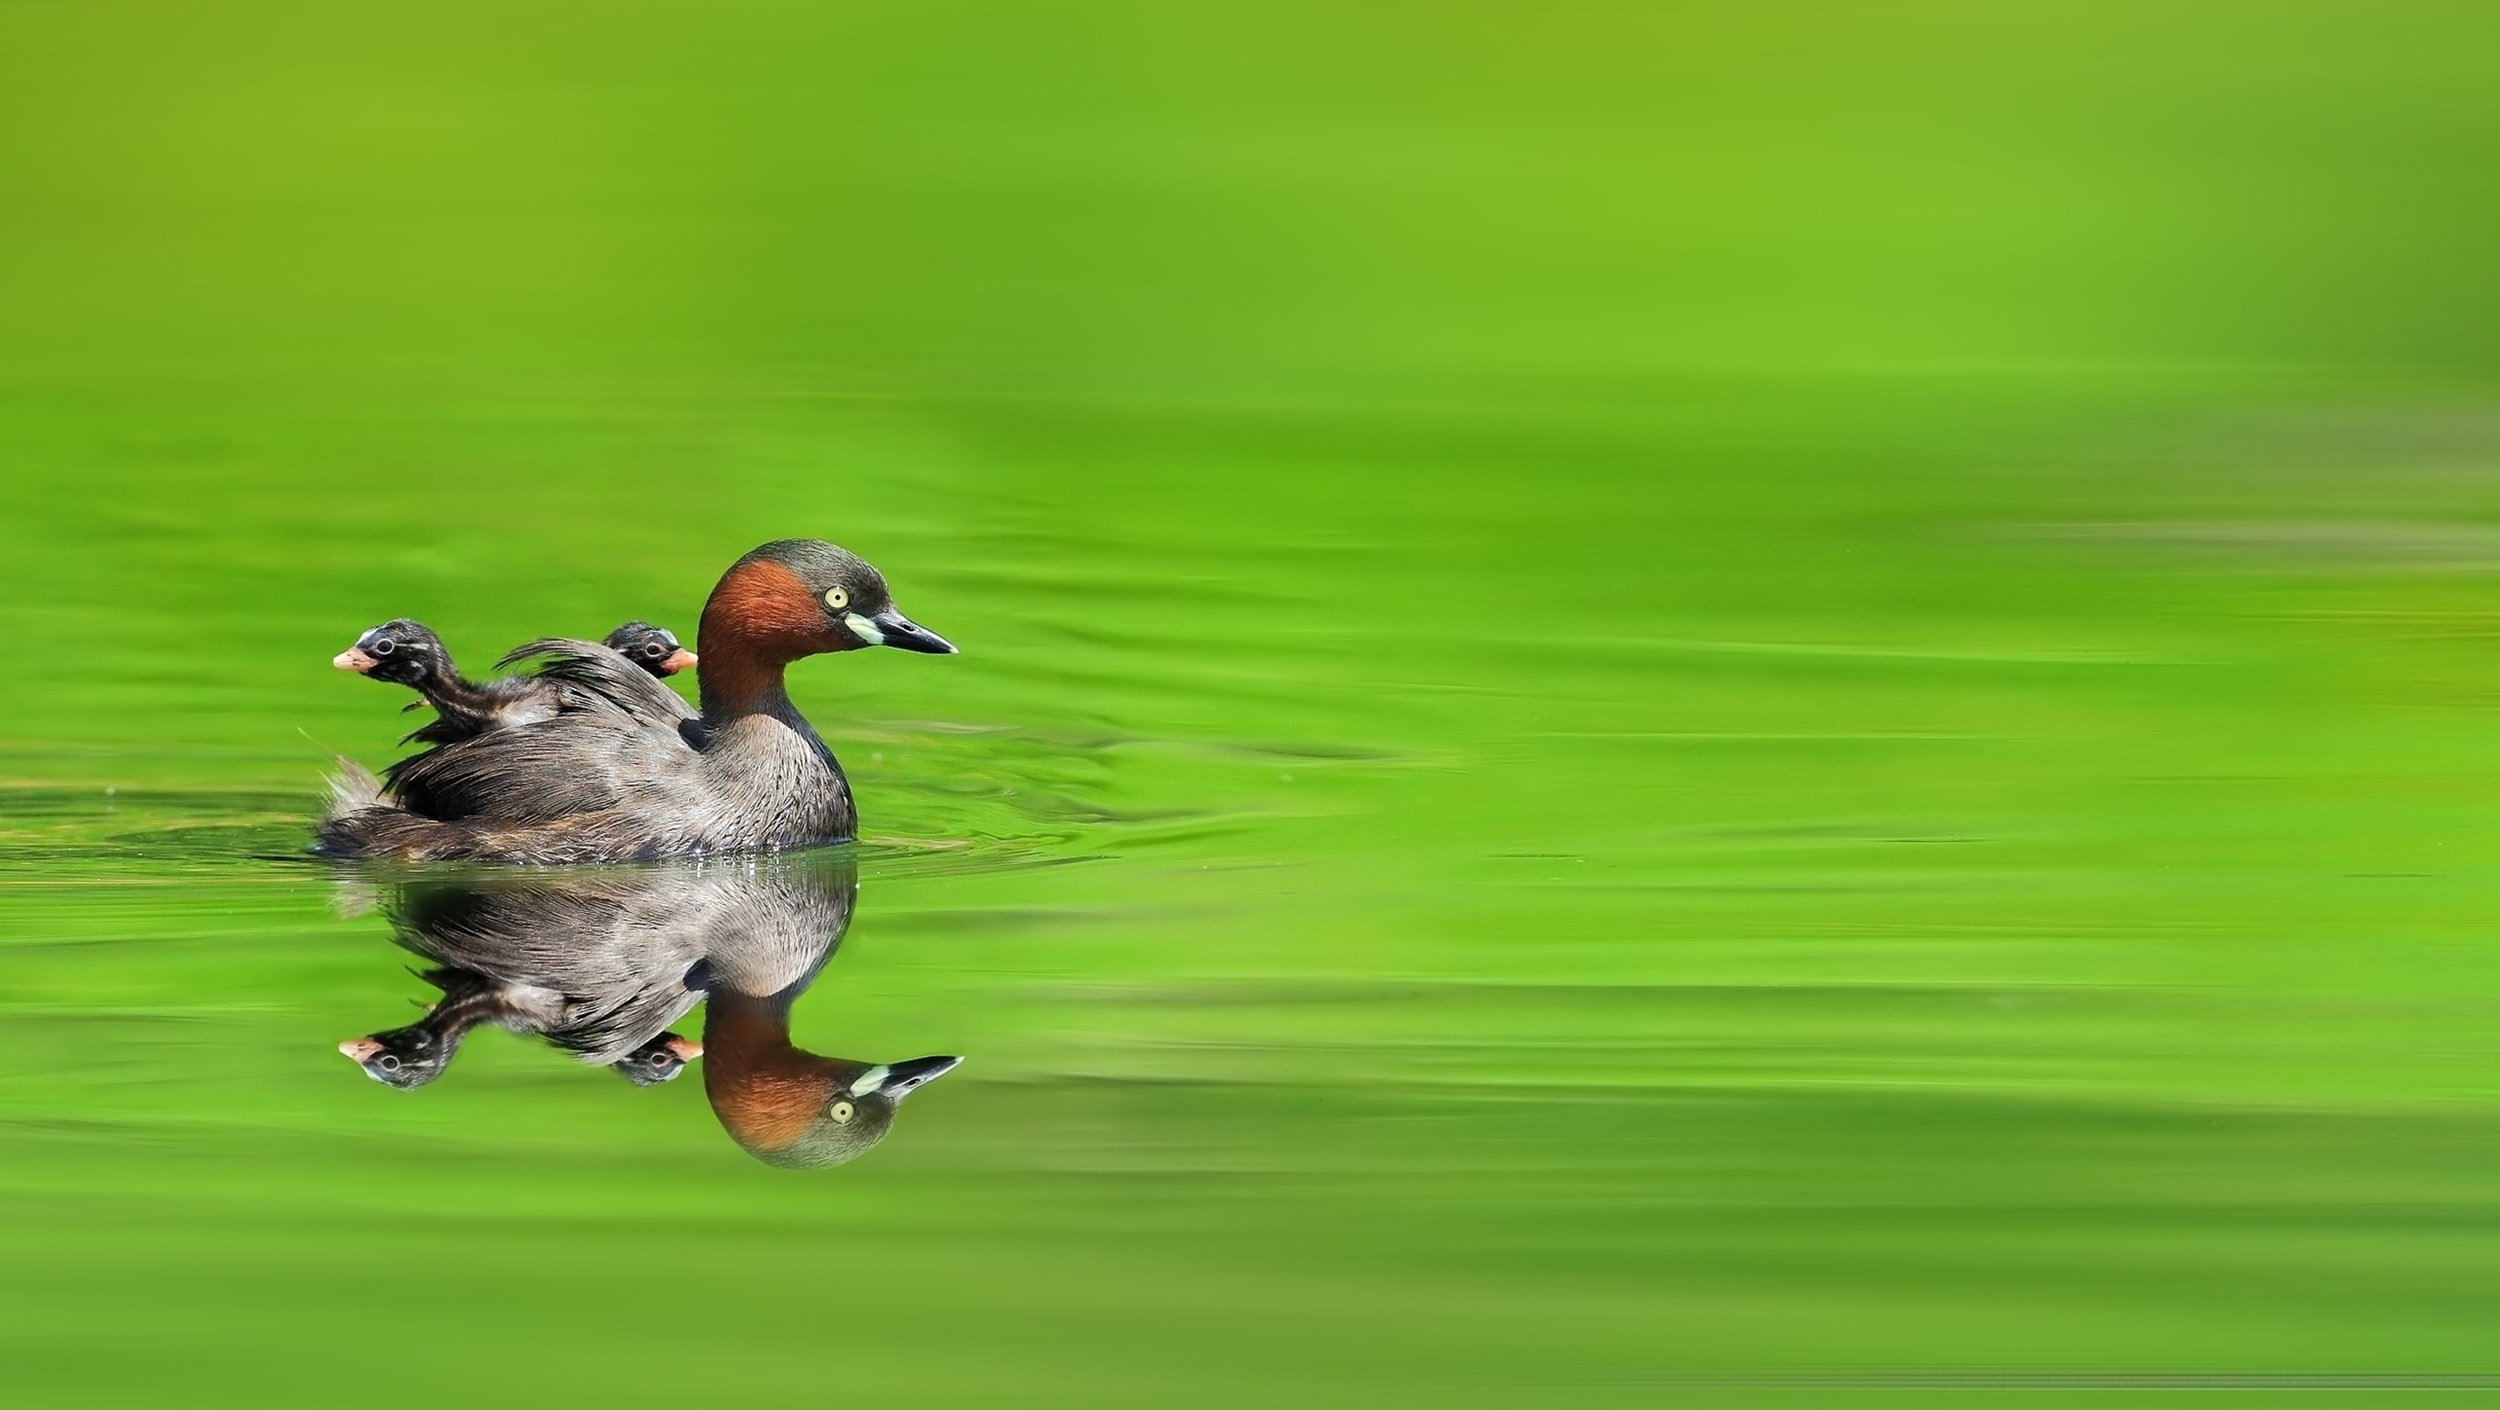 A Little Grebe swimming on water with a green reflection from the surrounding tress, with their young on their back.